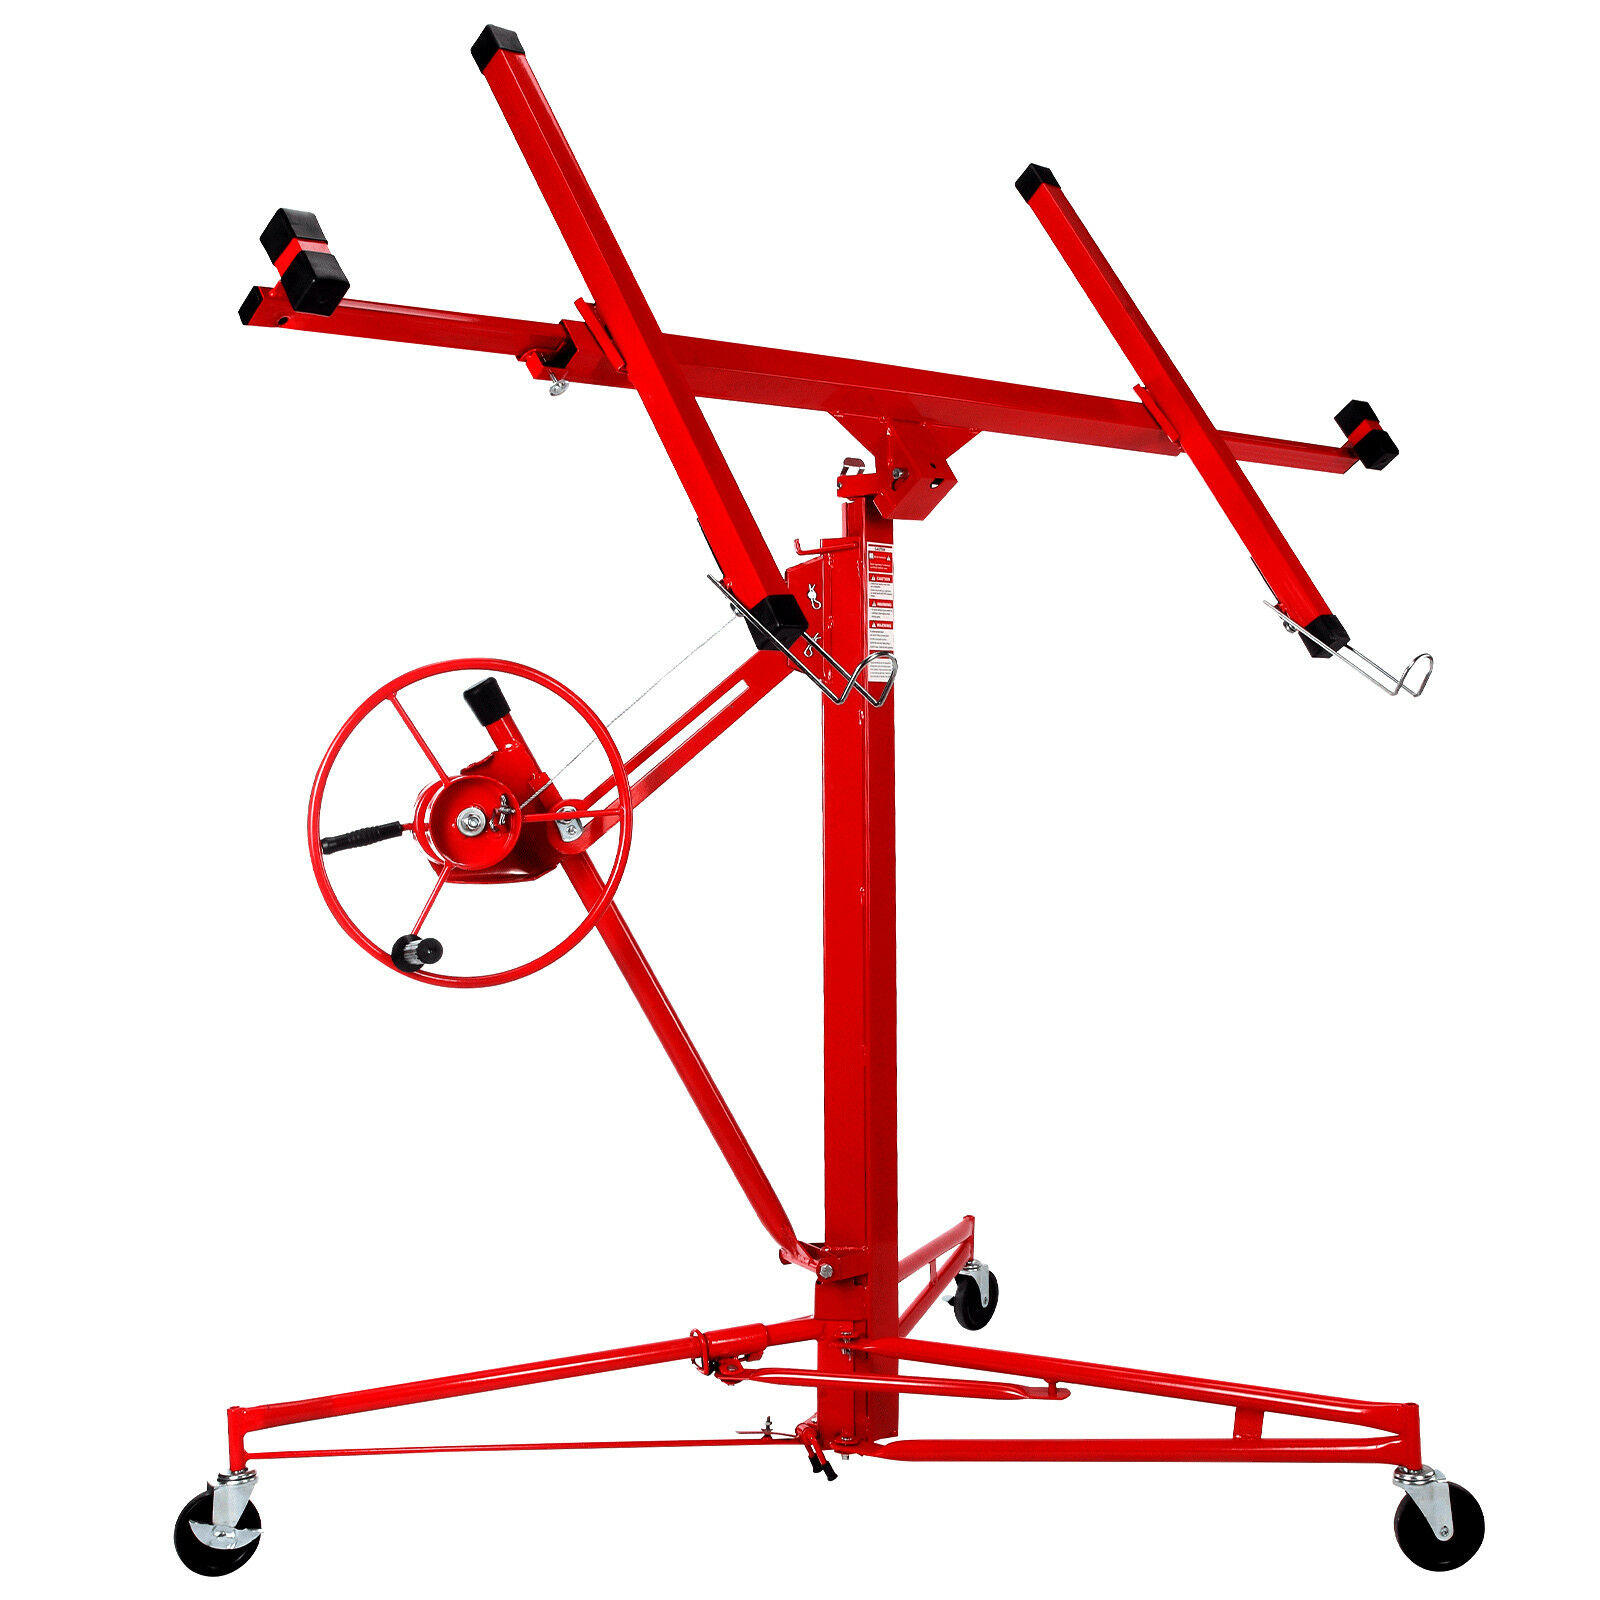 New 11' Drywall Lifter Panel Hoist Jack Rolling Caster Construction Lockable Red